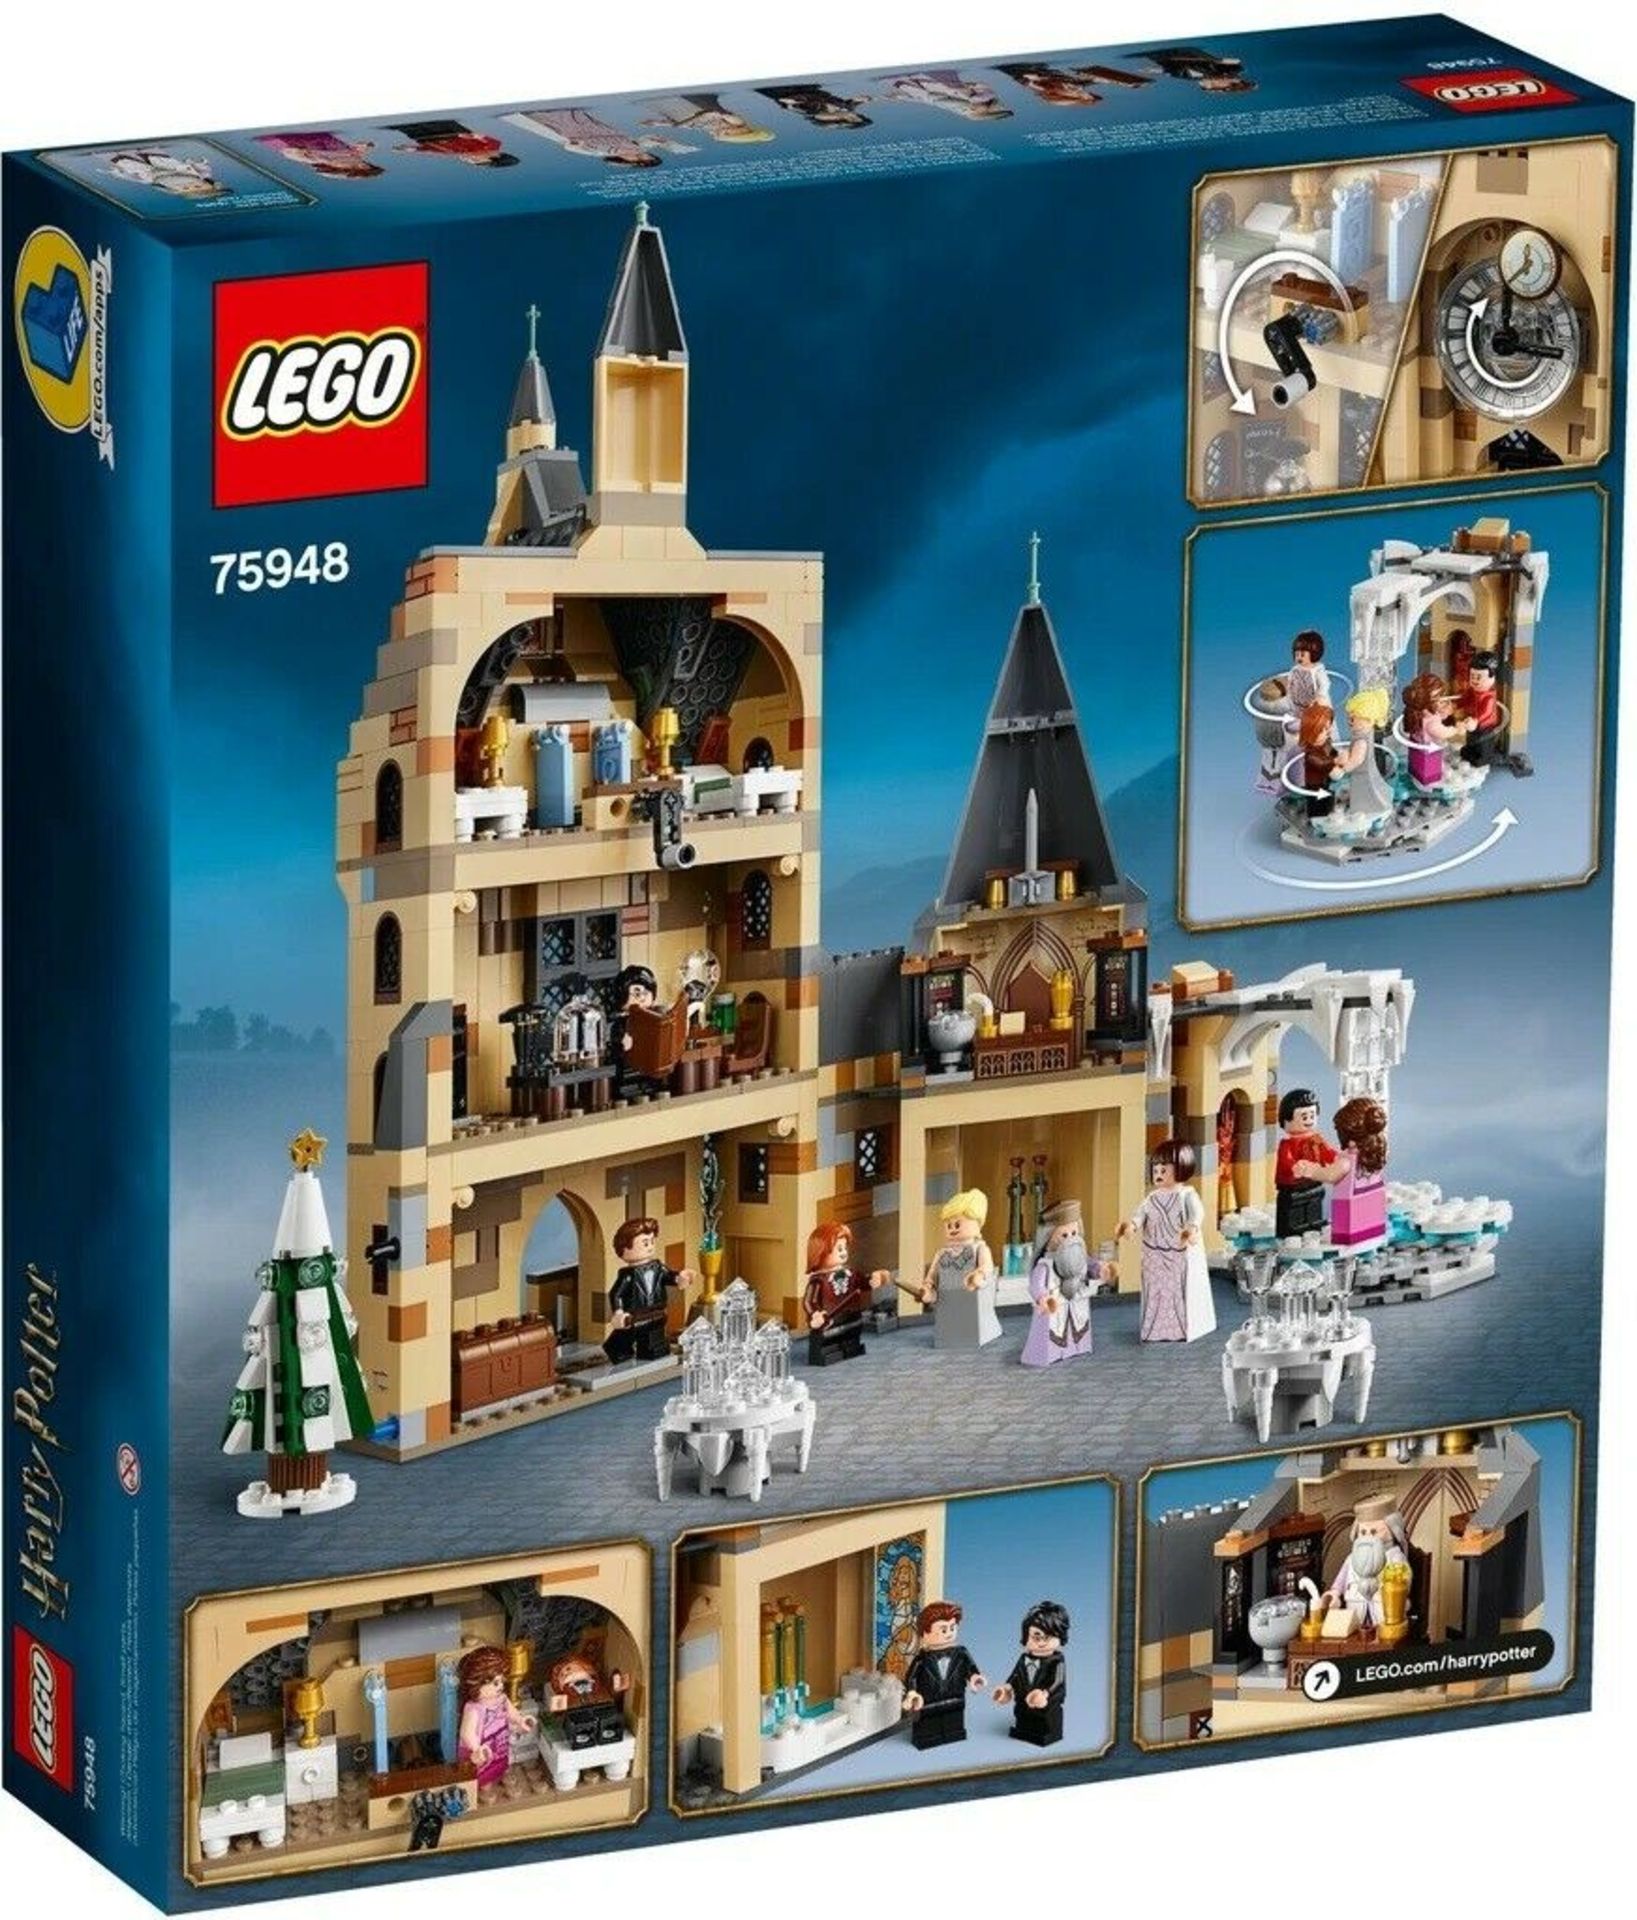 1 x Lego Harry Potter Hogwarts Clock Tower 75948 Lego Playset - Boxed and Sealed - CL007 - Location: - Image 5 of 5